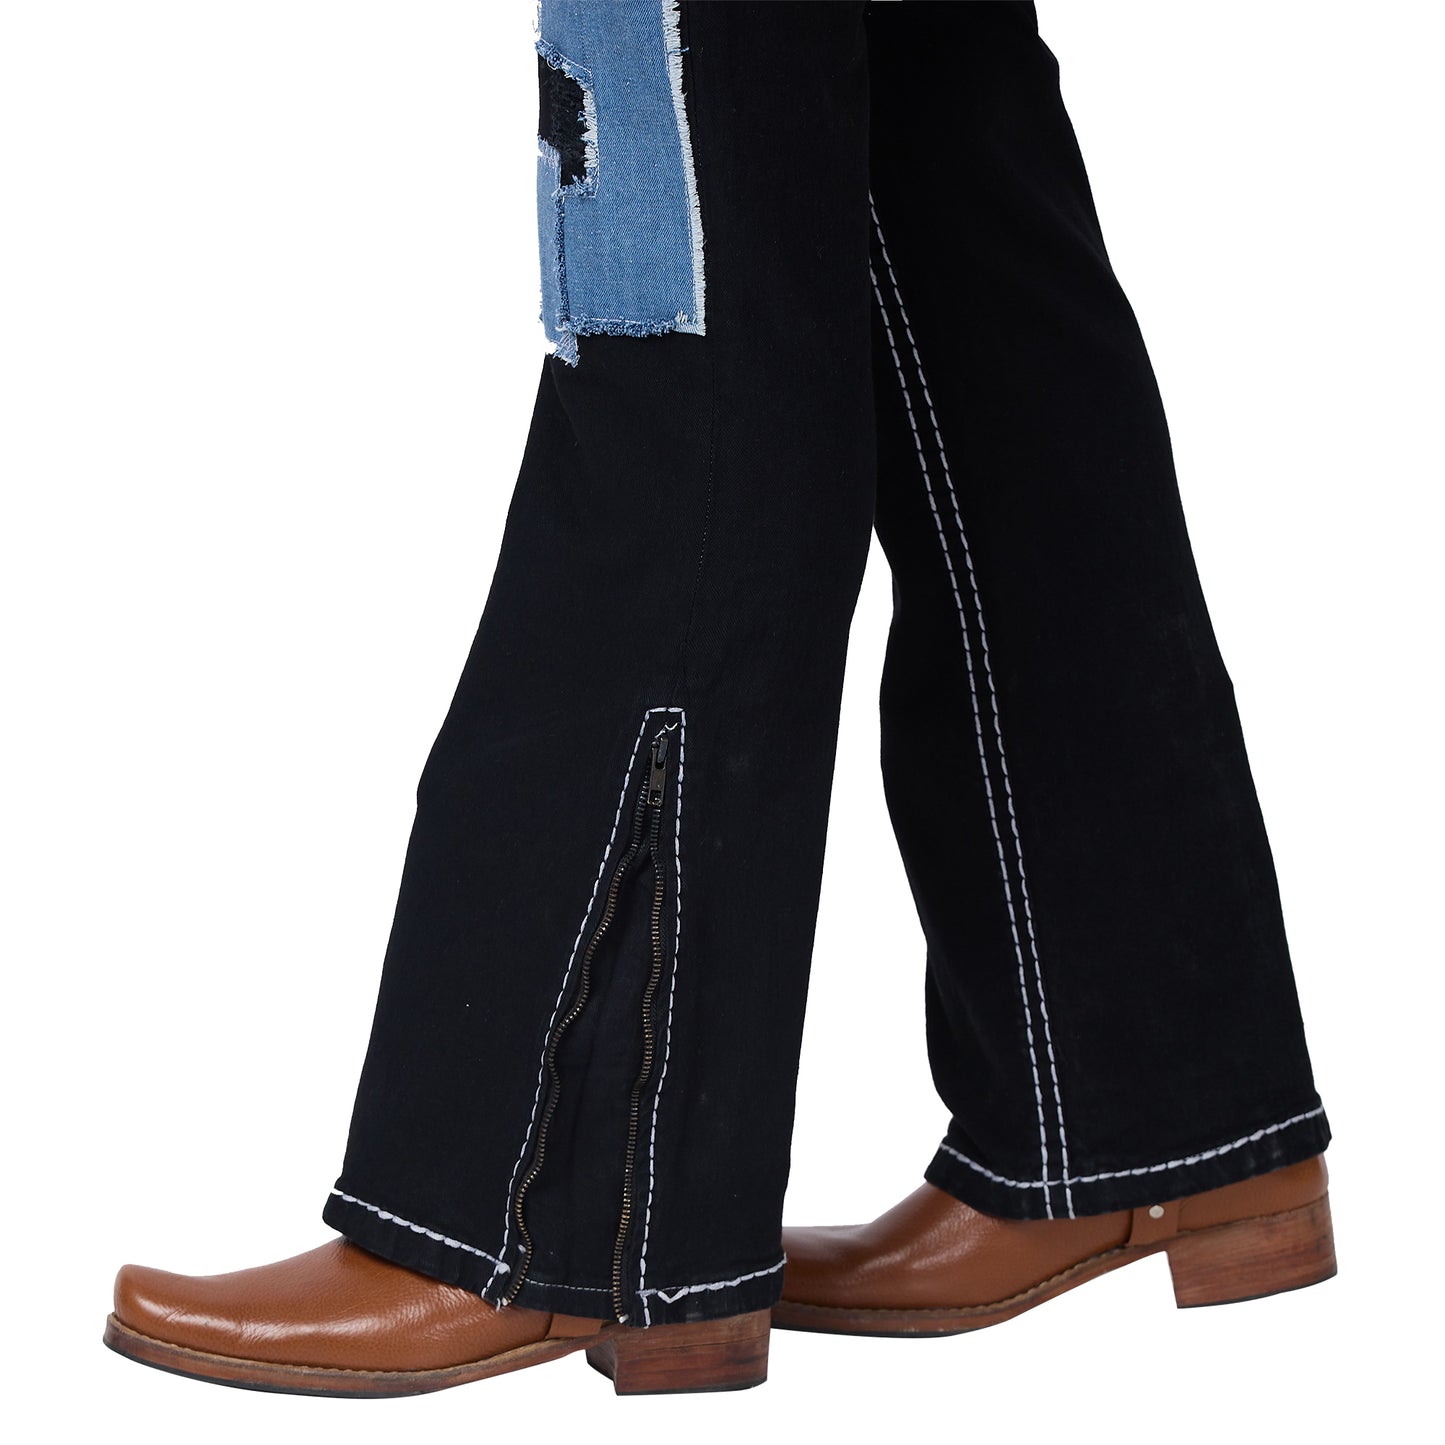 Mens Black Bootcut Slim Fit Jeans With Saddle Stitch Strechable.